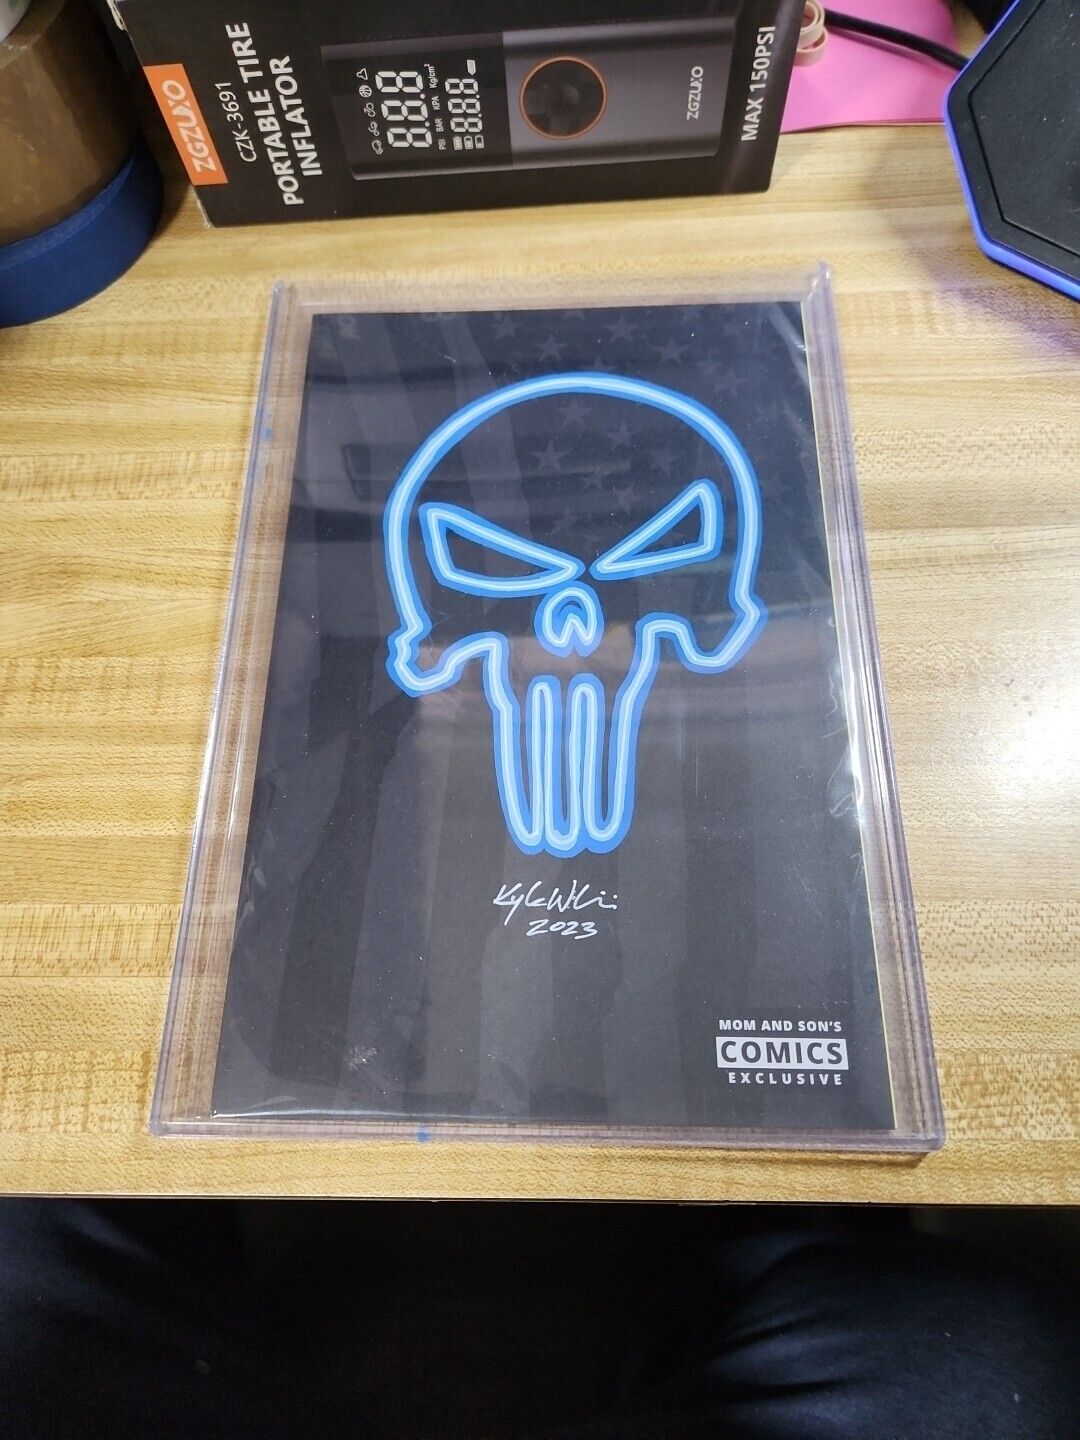 SIGNED KYLE WILLIS NEON PUNISHER FULL SKETCH ON COMIC BOOK.  